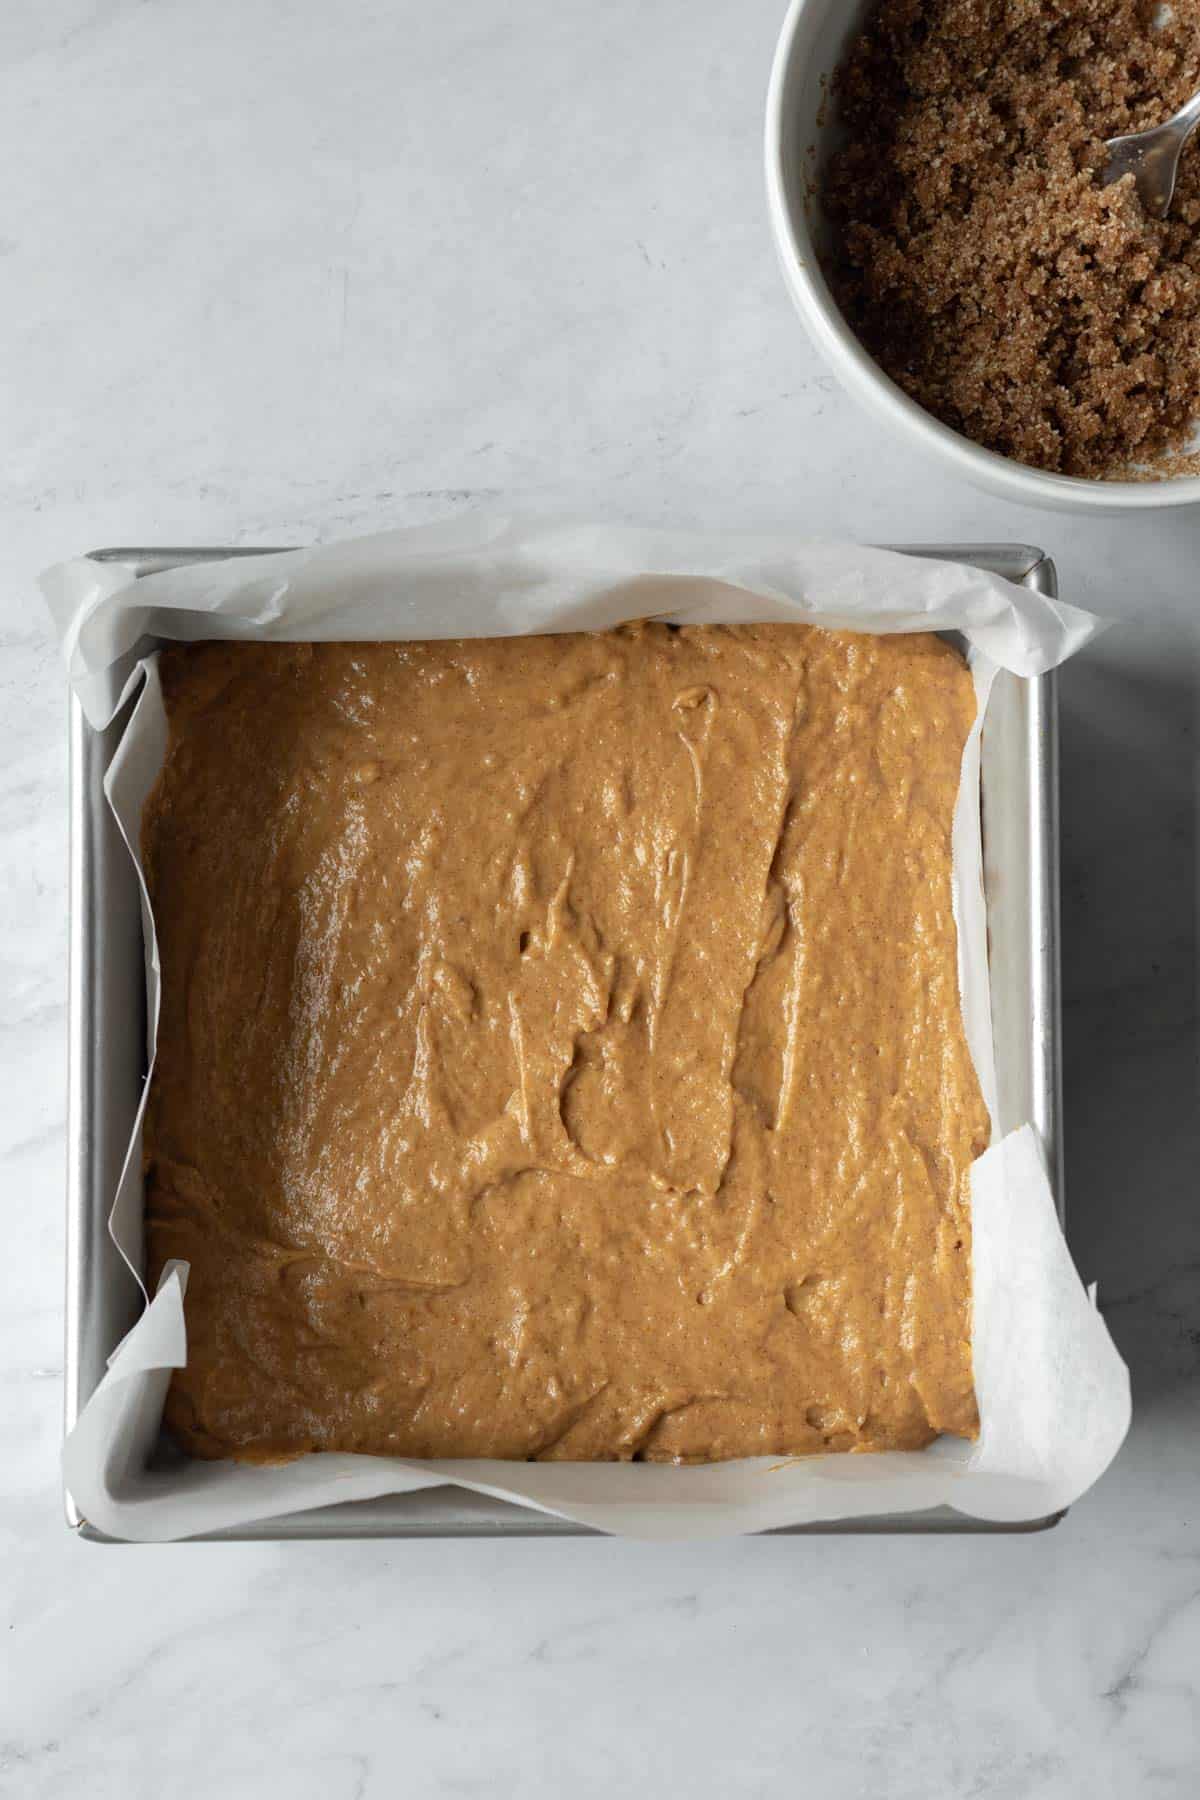 Thick coffee cake batter spread out in a square baking pan.